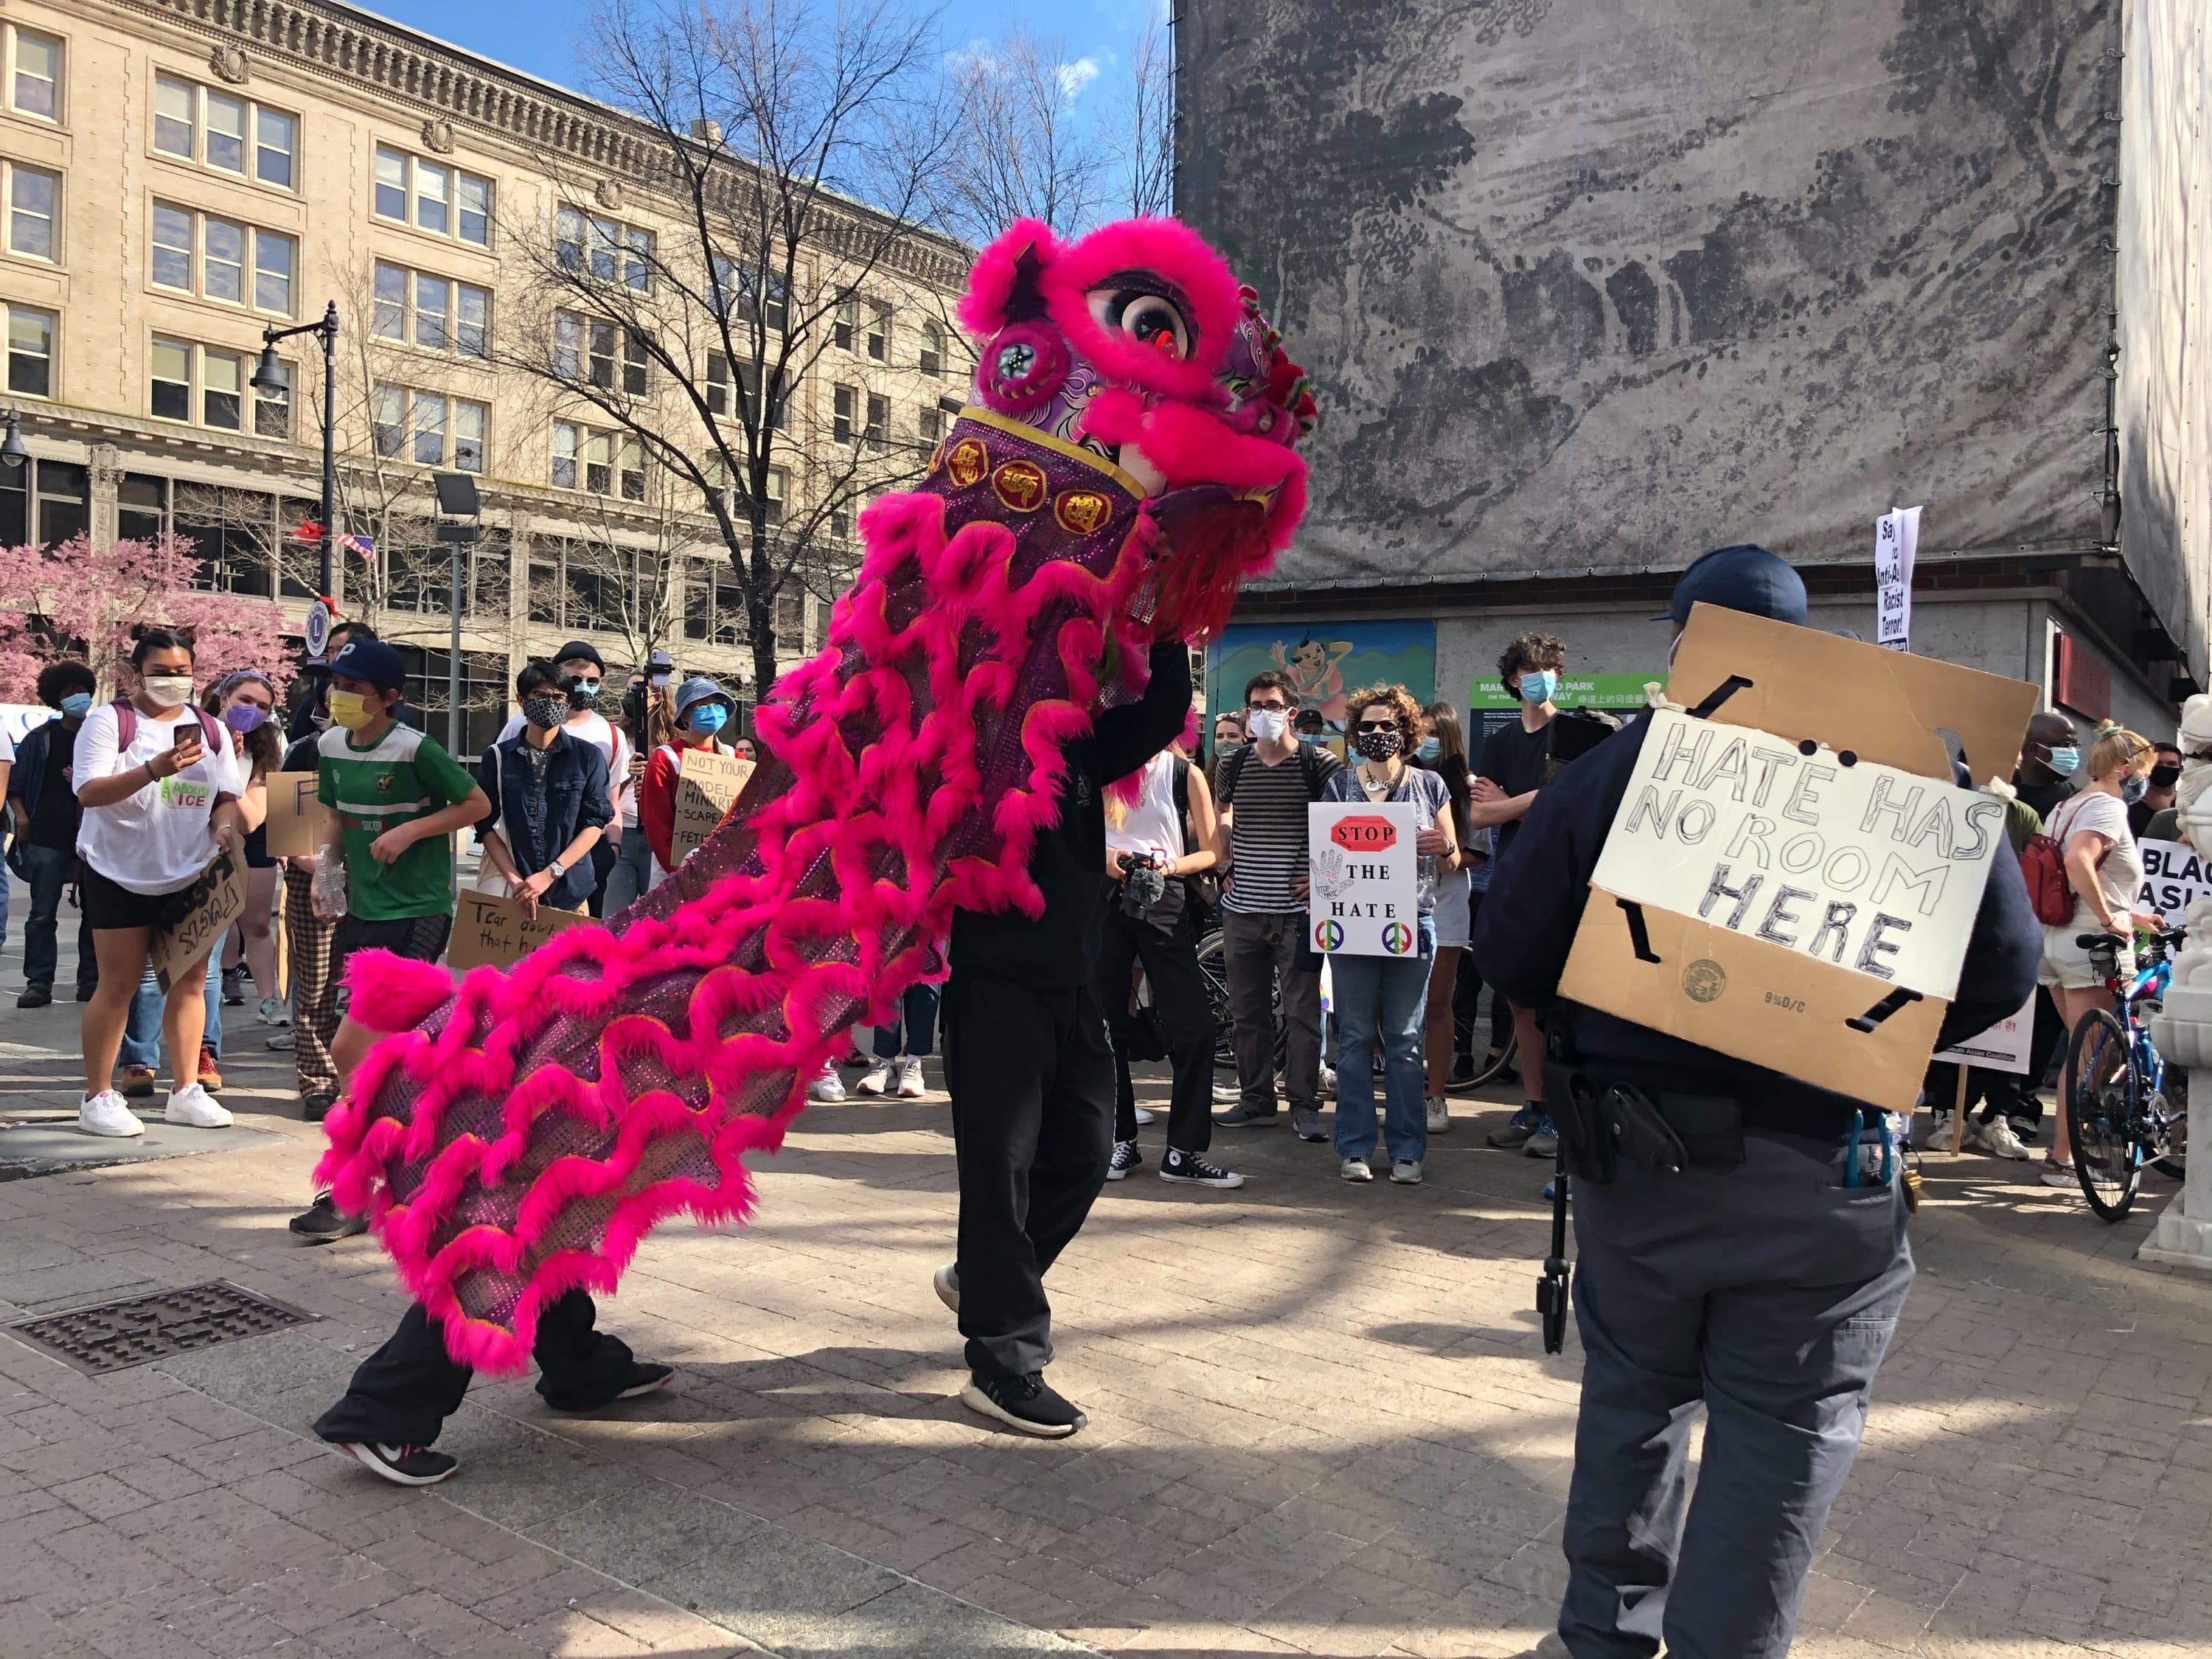 Demonstrators rallied and marched toward Chinatown in Boston during the “Out of the Orient: A March For Asian Futures” event on Saturday, April 10, 2021. (Quincy Walters / WBUR)